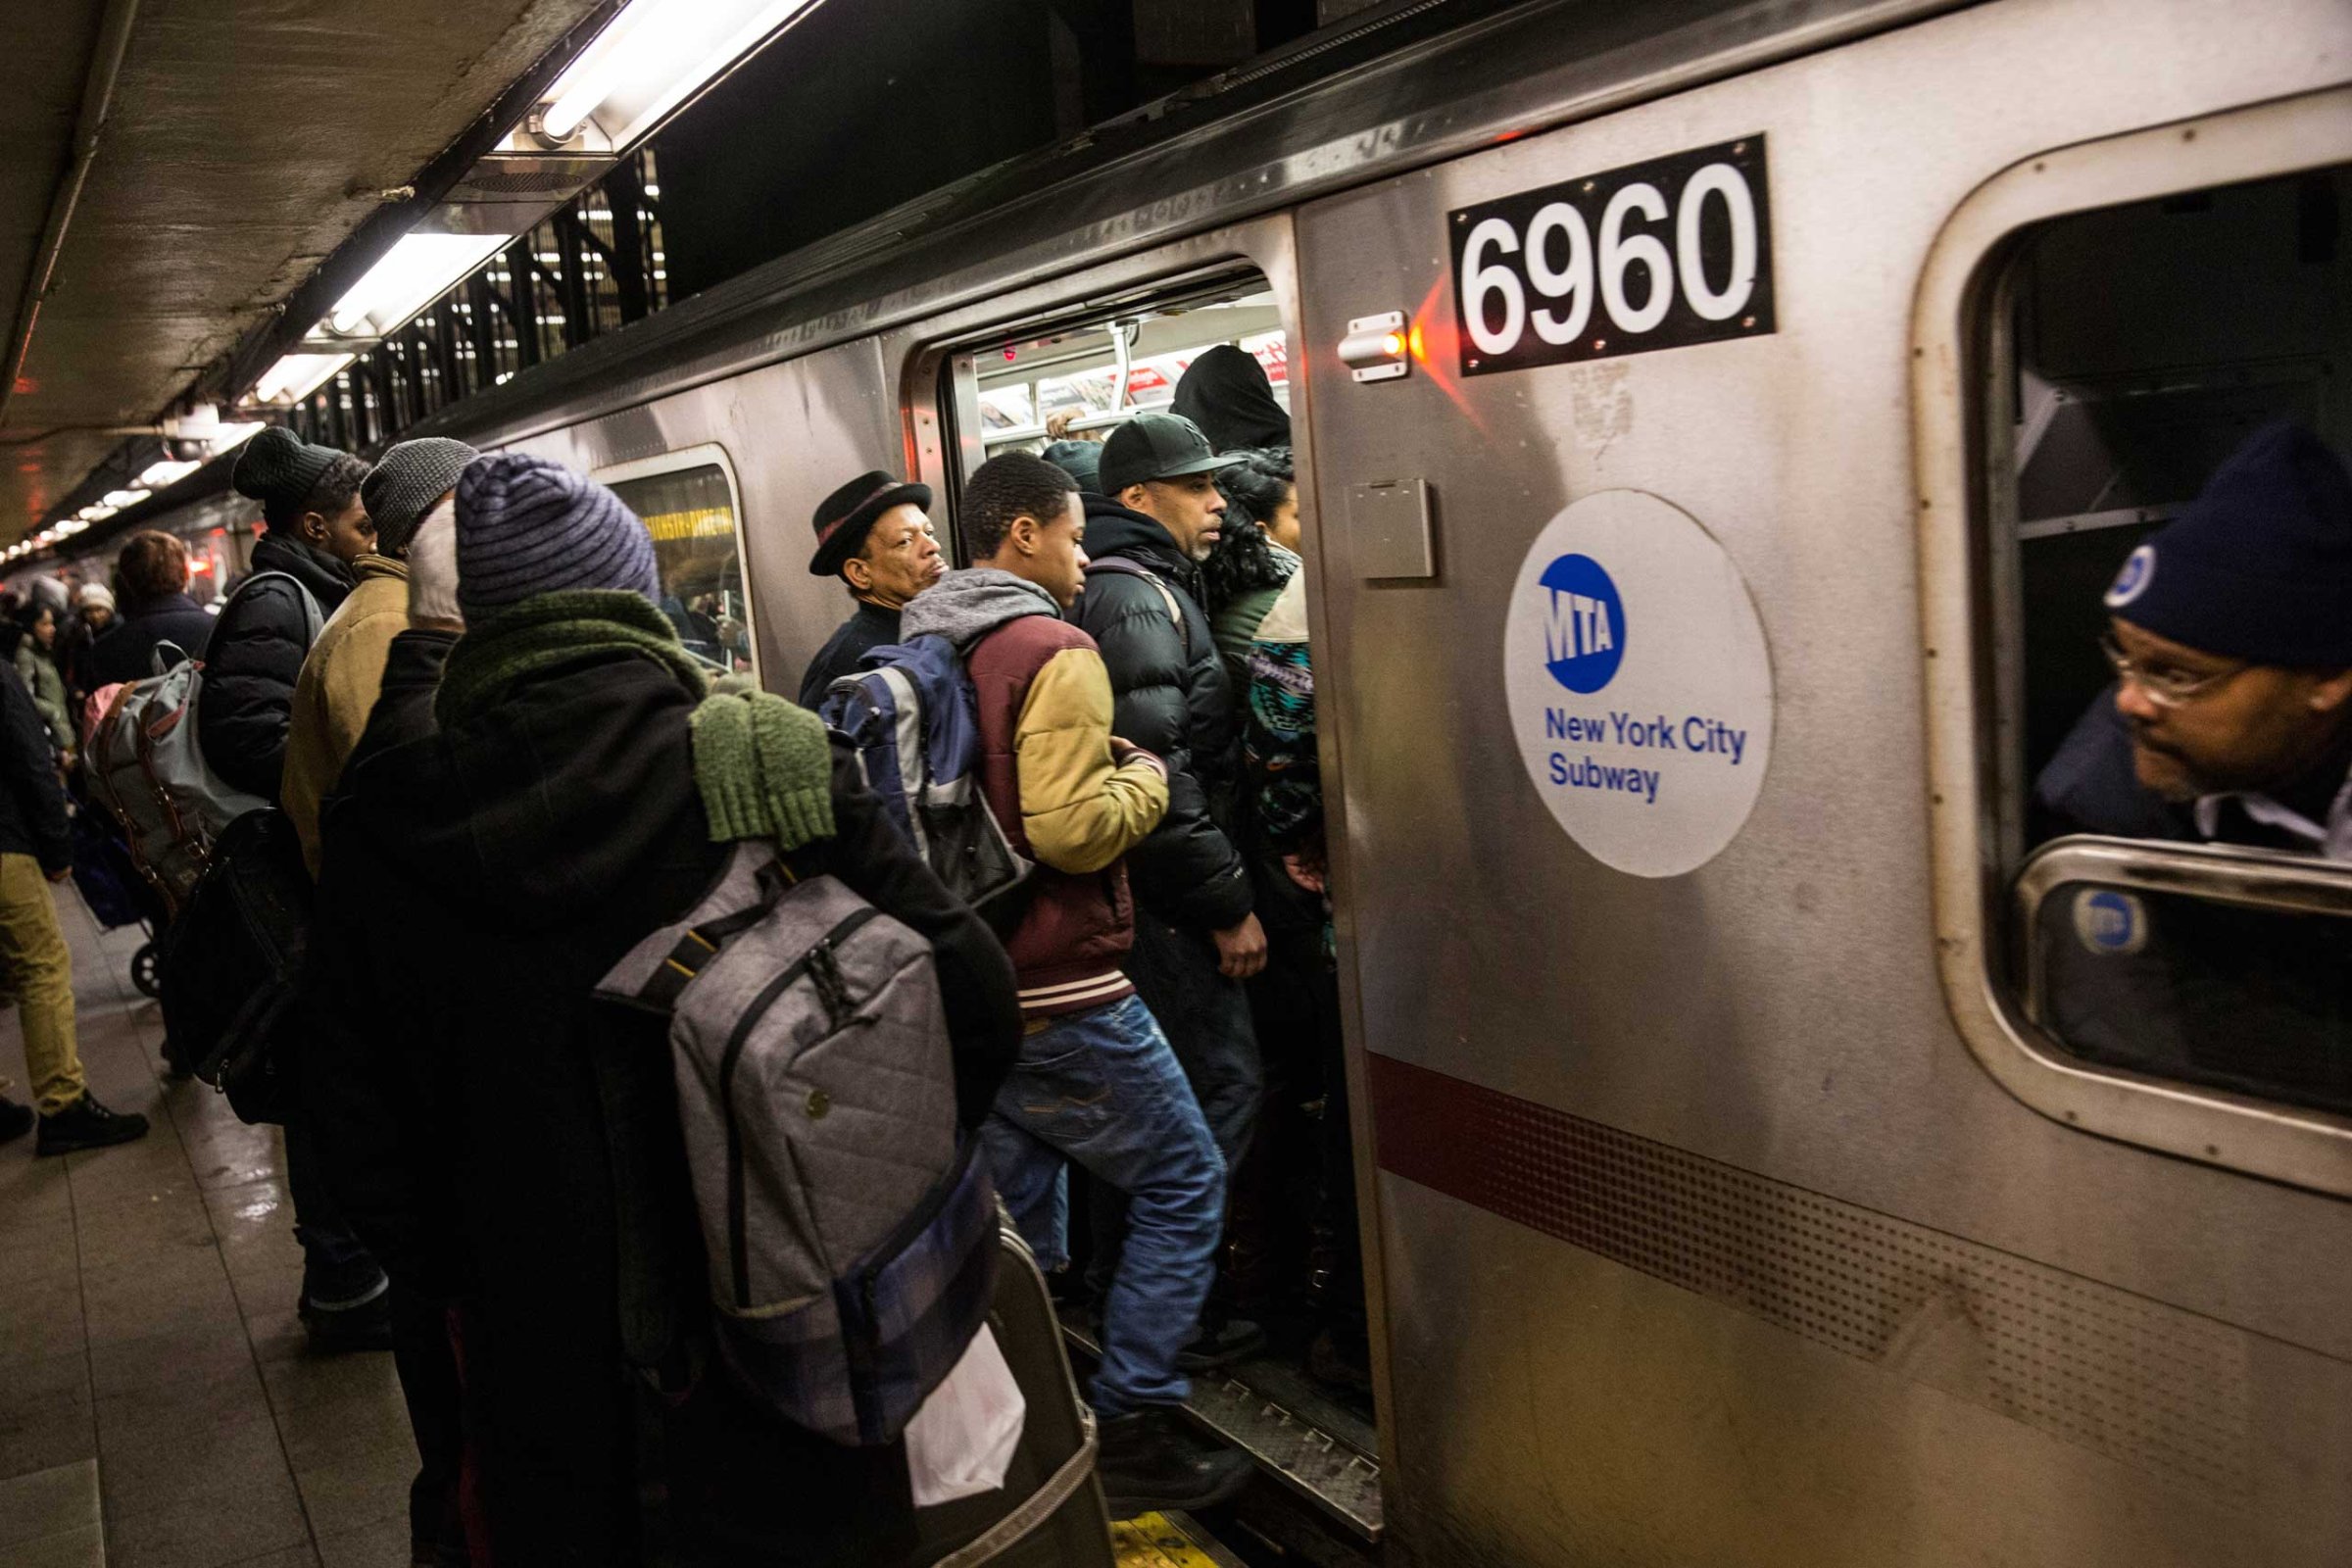 People board an uptown 5 train at Union Square on Jan. 28, 2015 in New York City.